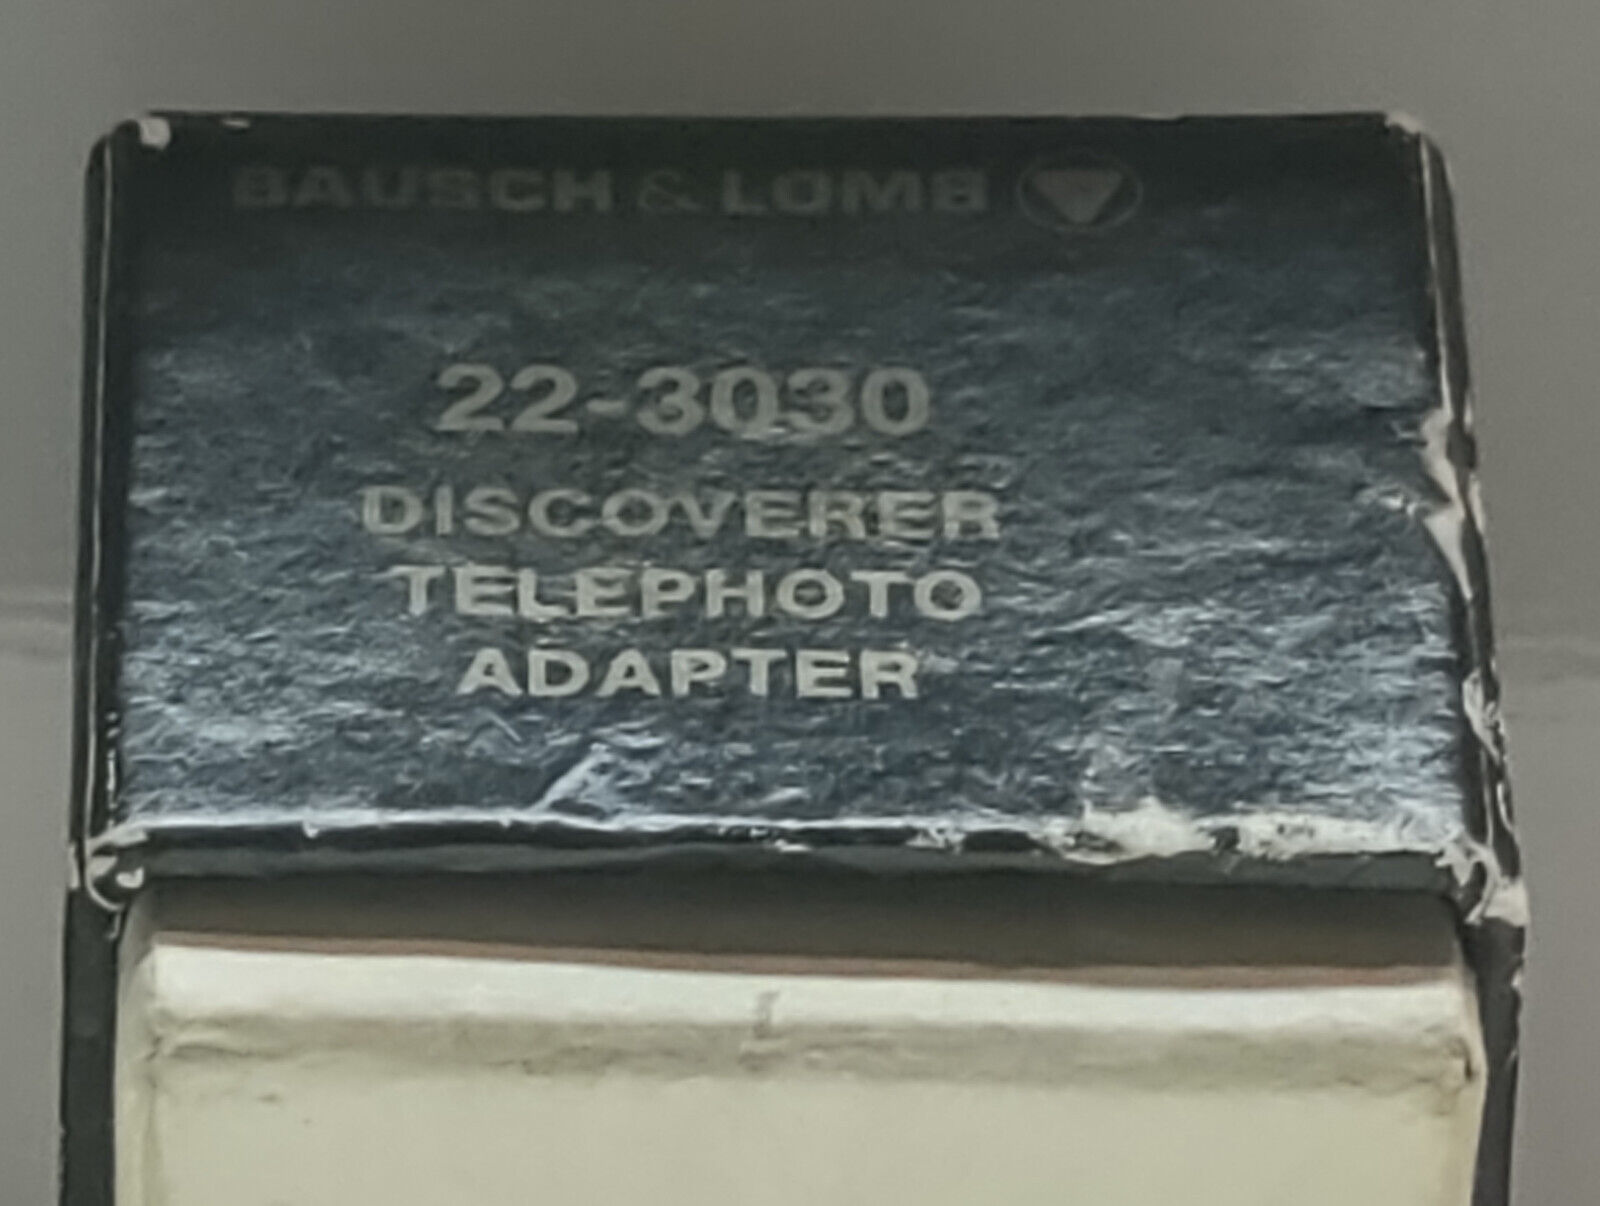 Vintage Bausch & Lomb 22-3030 Discoverer Telephoto Adapter